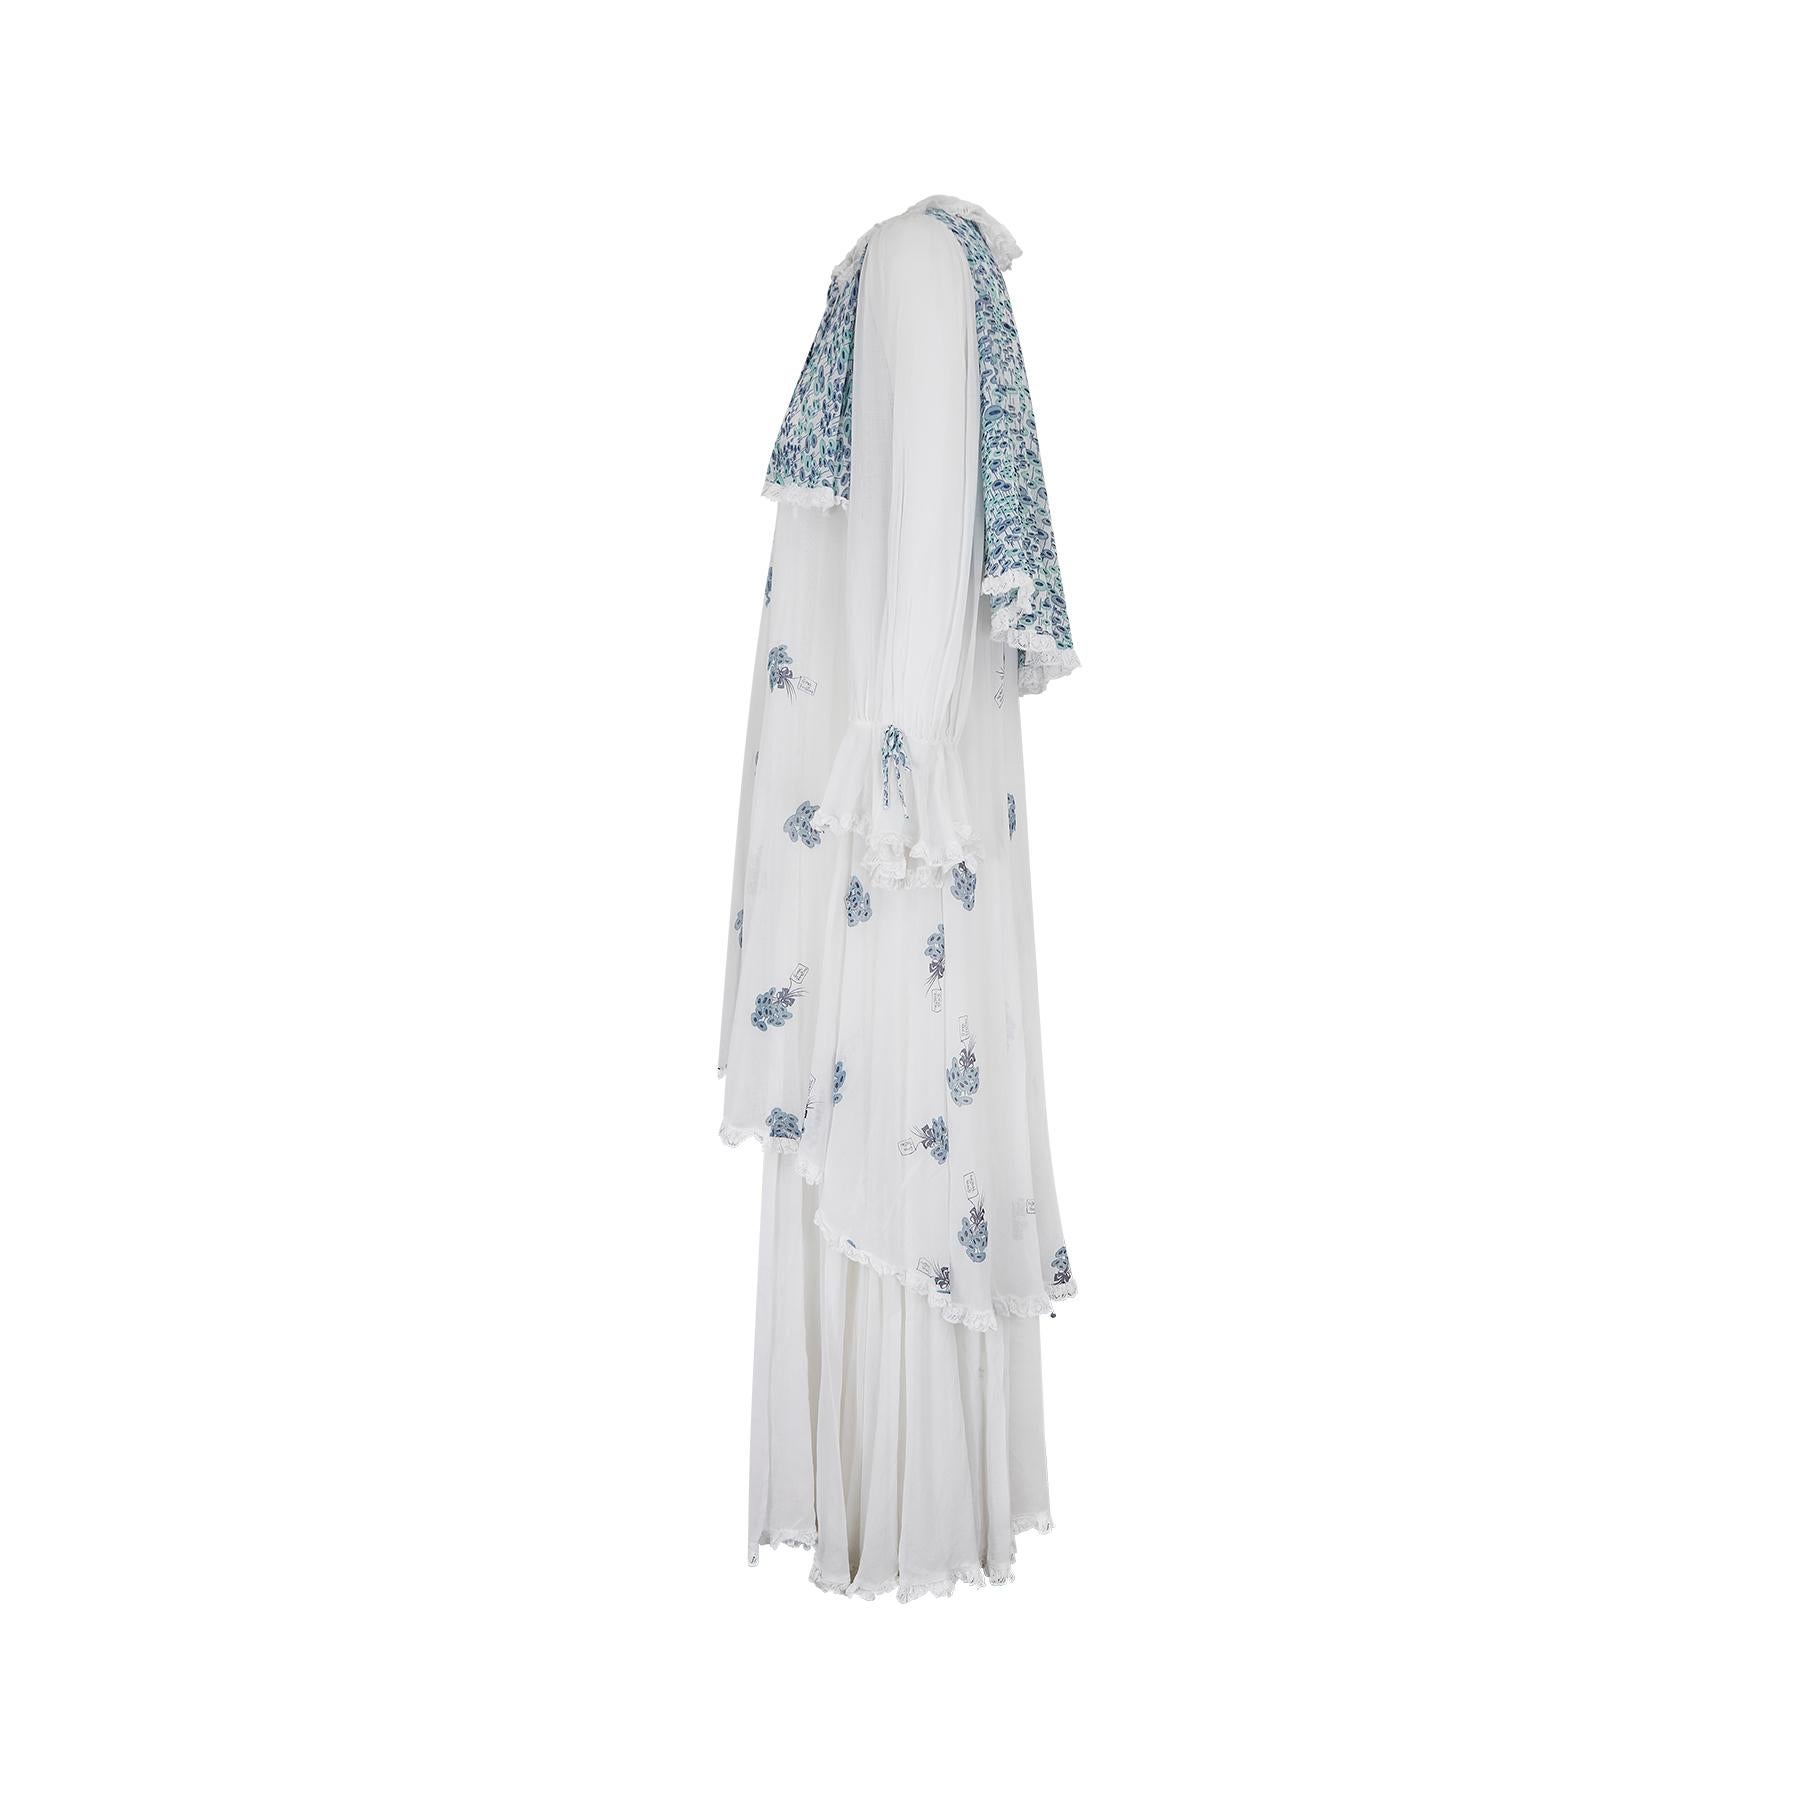 1970s Gina Fratini White and Blue Floral Cotton Maxi Dress In Excellent Condition For Sale In London, GB